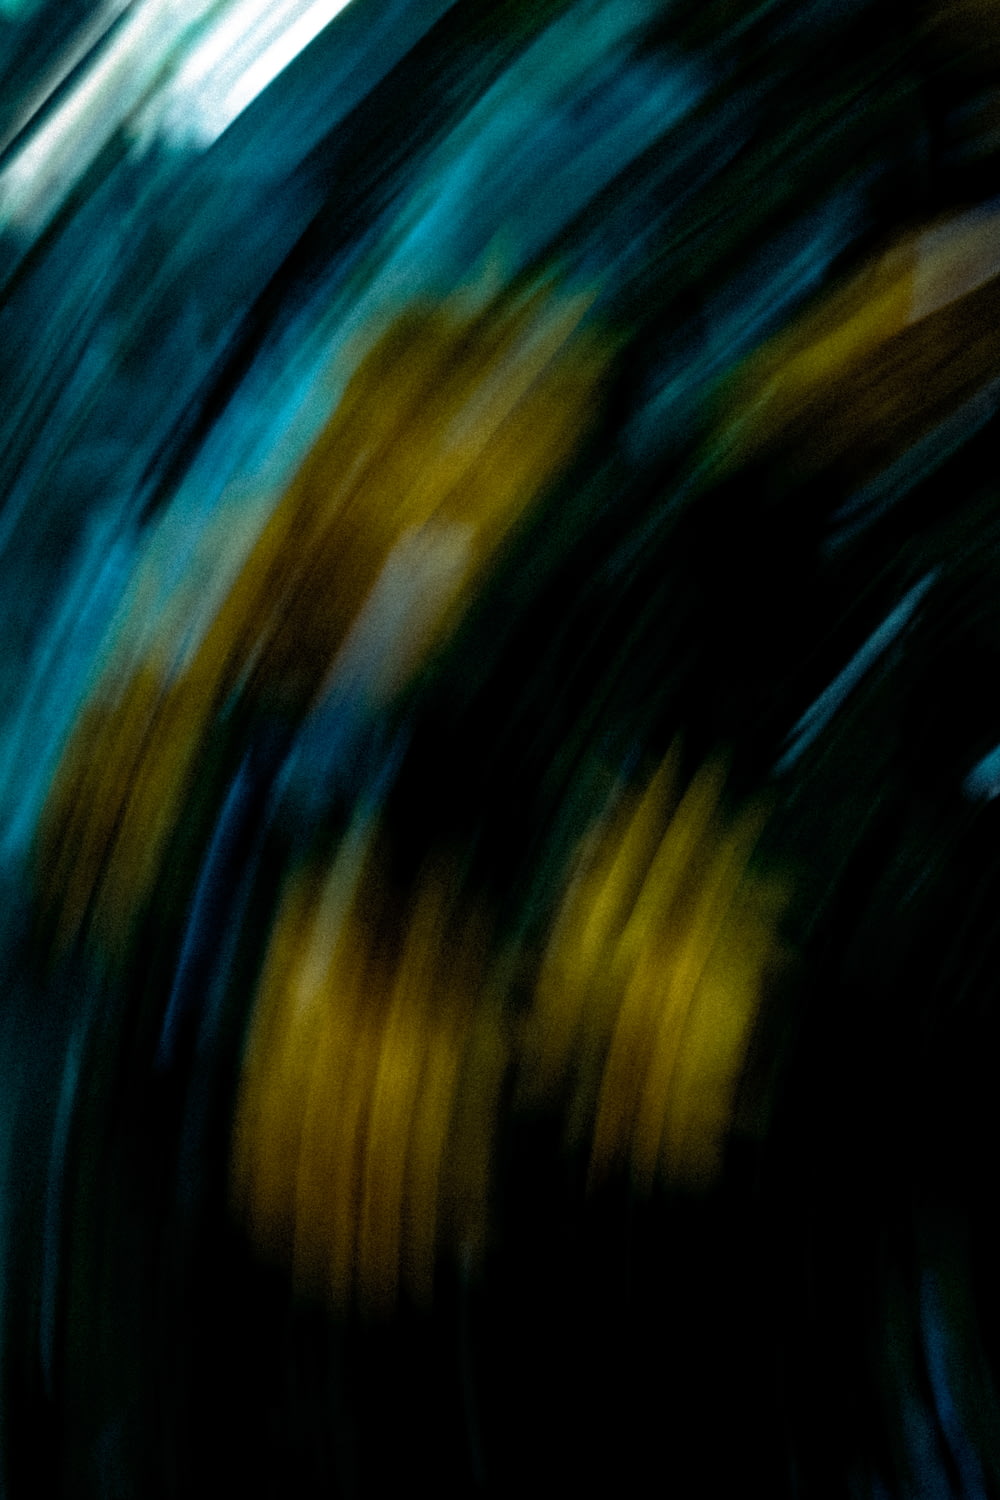 a blurry photo of a yellow and blue object